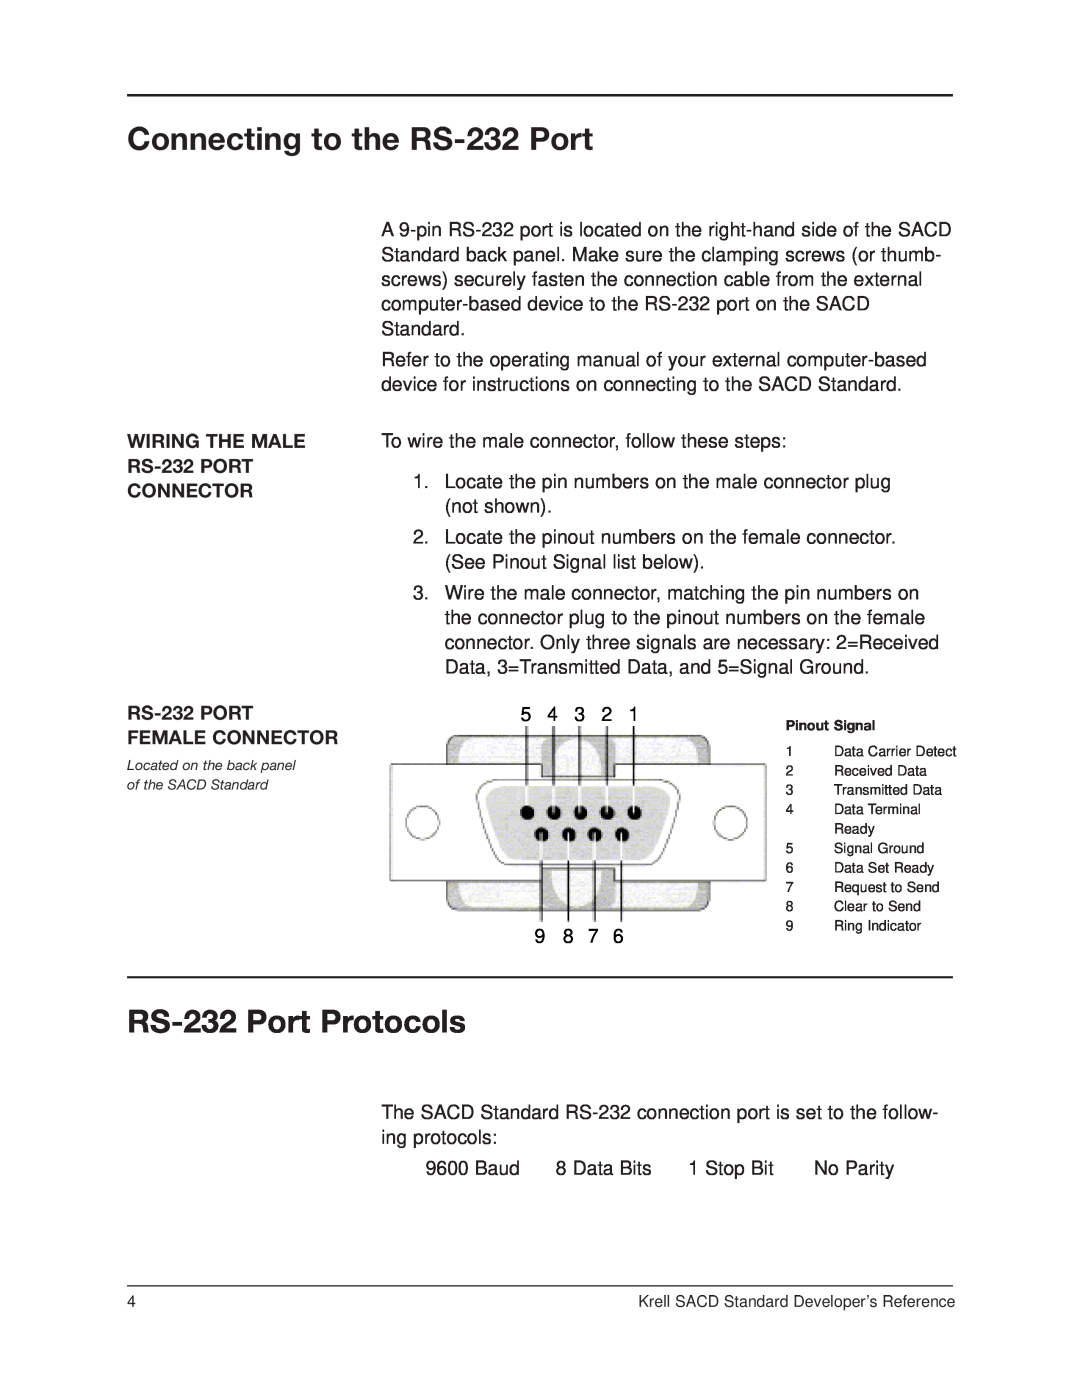 Krell Industries manual Connecting to the RS-232Port, RS-232Port Protocols, WIRING THE MALE RS-232PORT CONNECTOR 